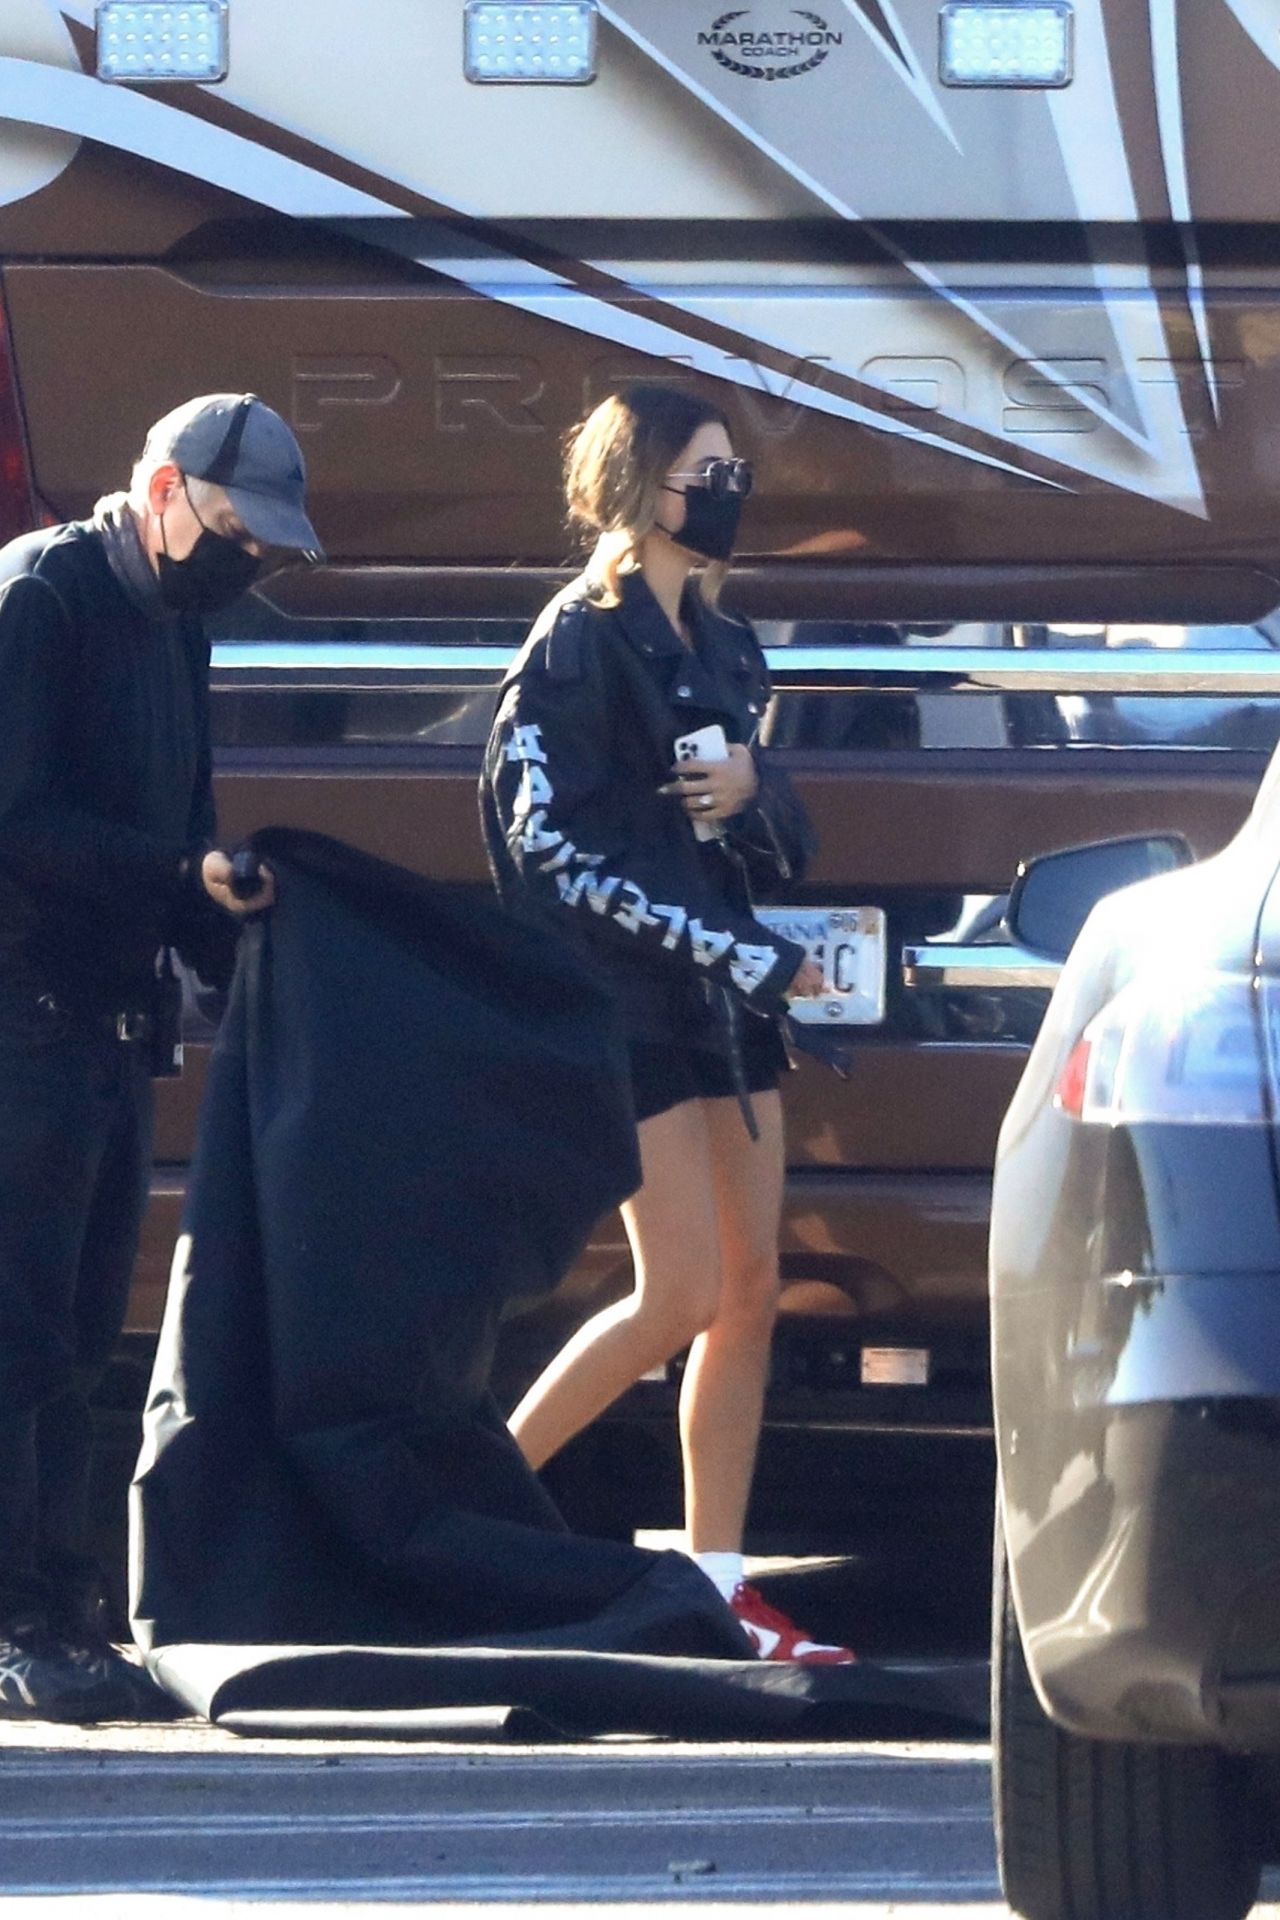 hailey-bieber-and-justin-bieber-on-the-set-of-a-music-video-in-la-10-29-2020-0.jpg